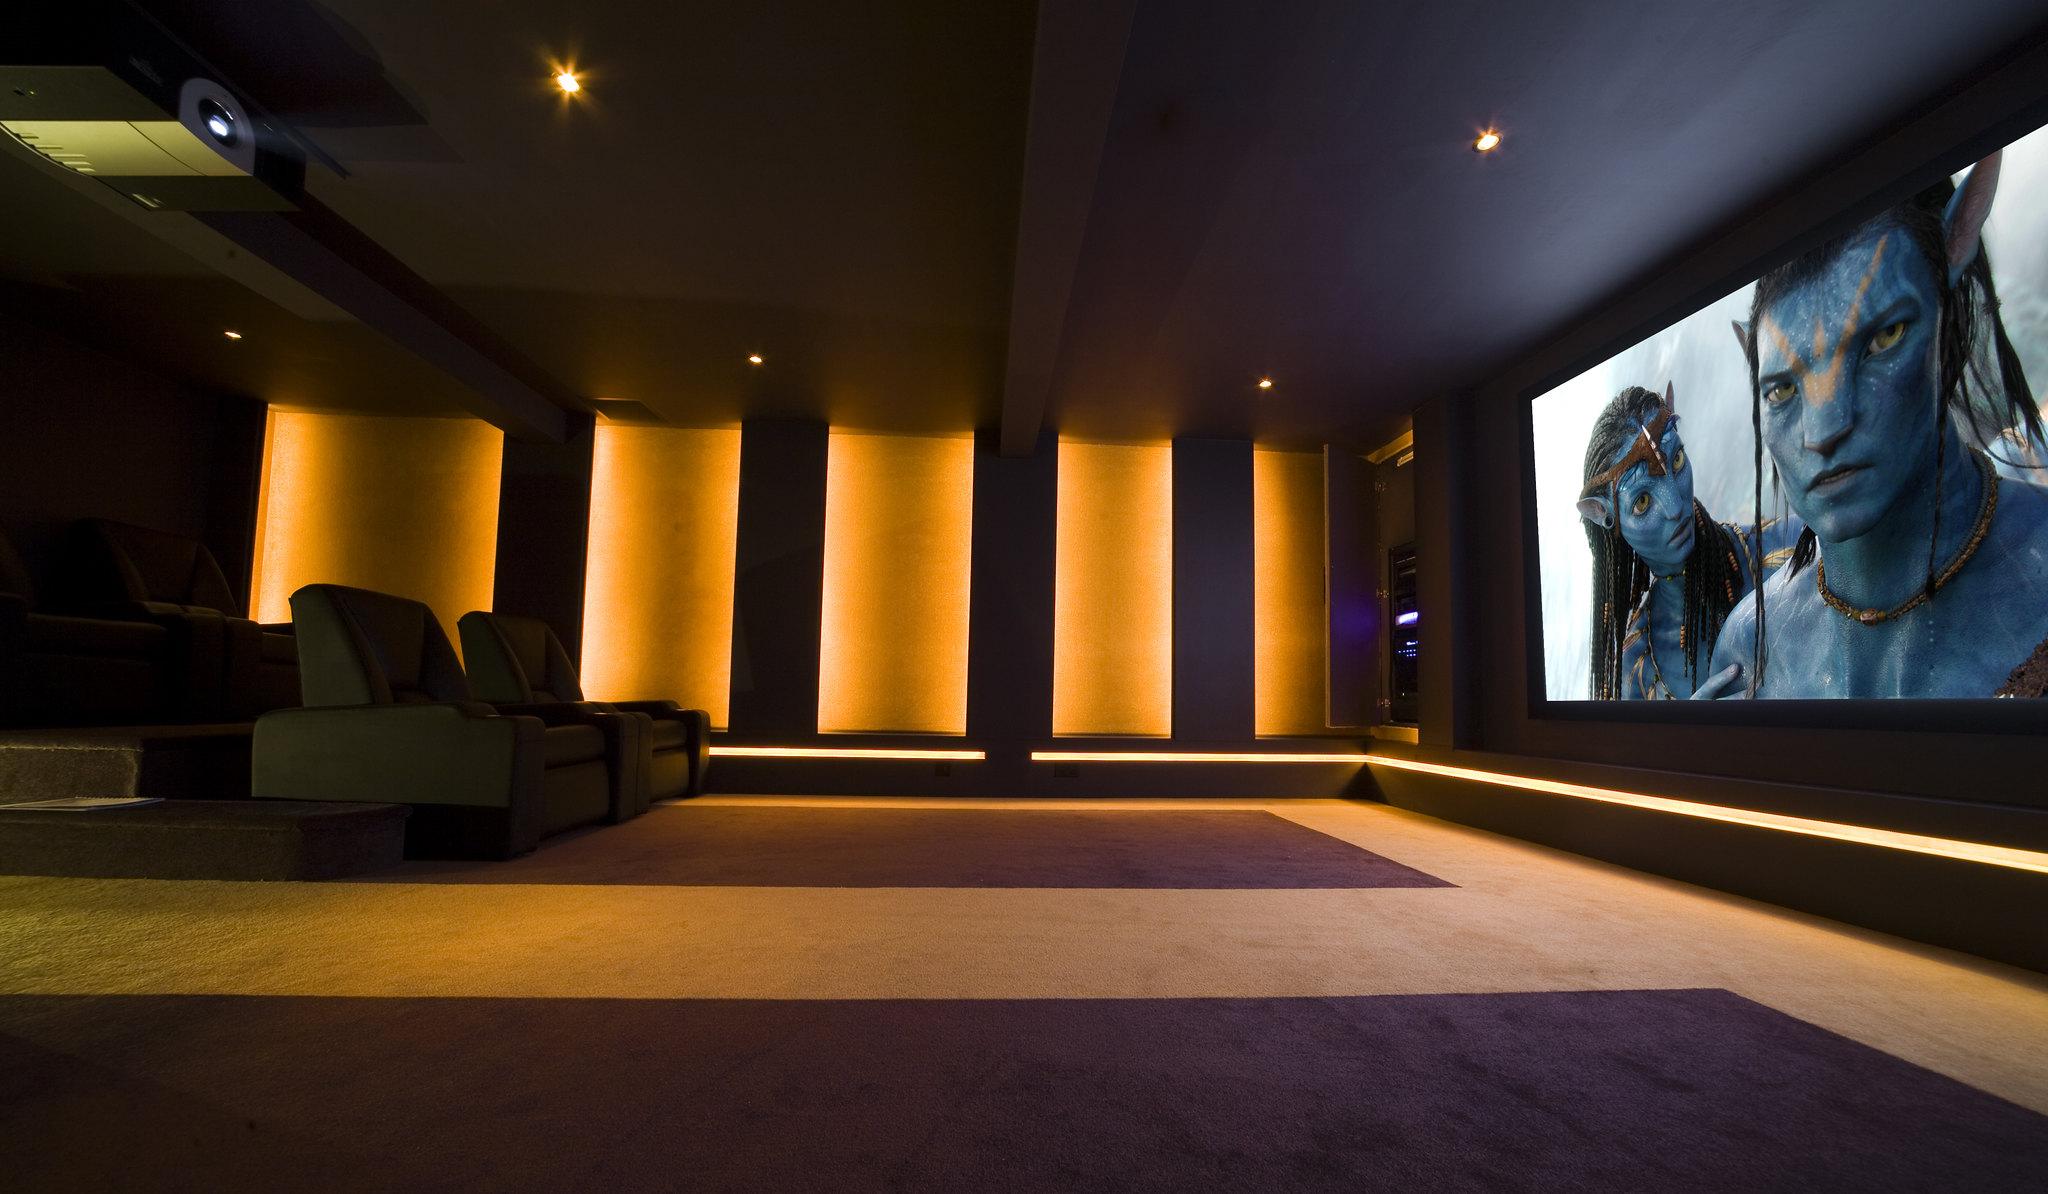 Home cinema room interior design in Cheshire and liverpool